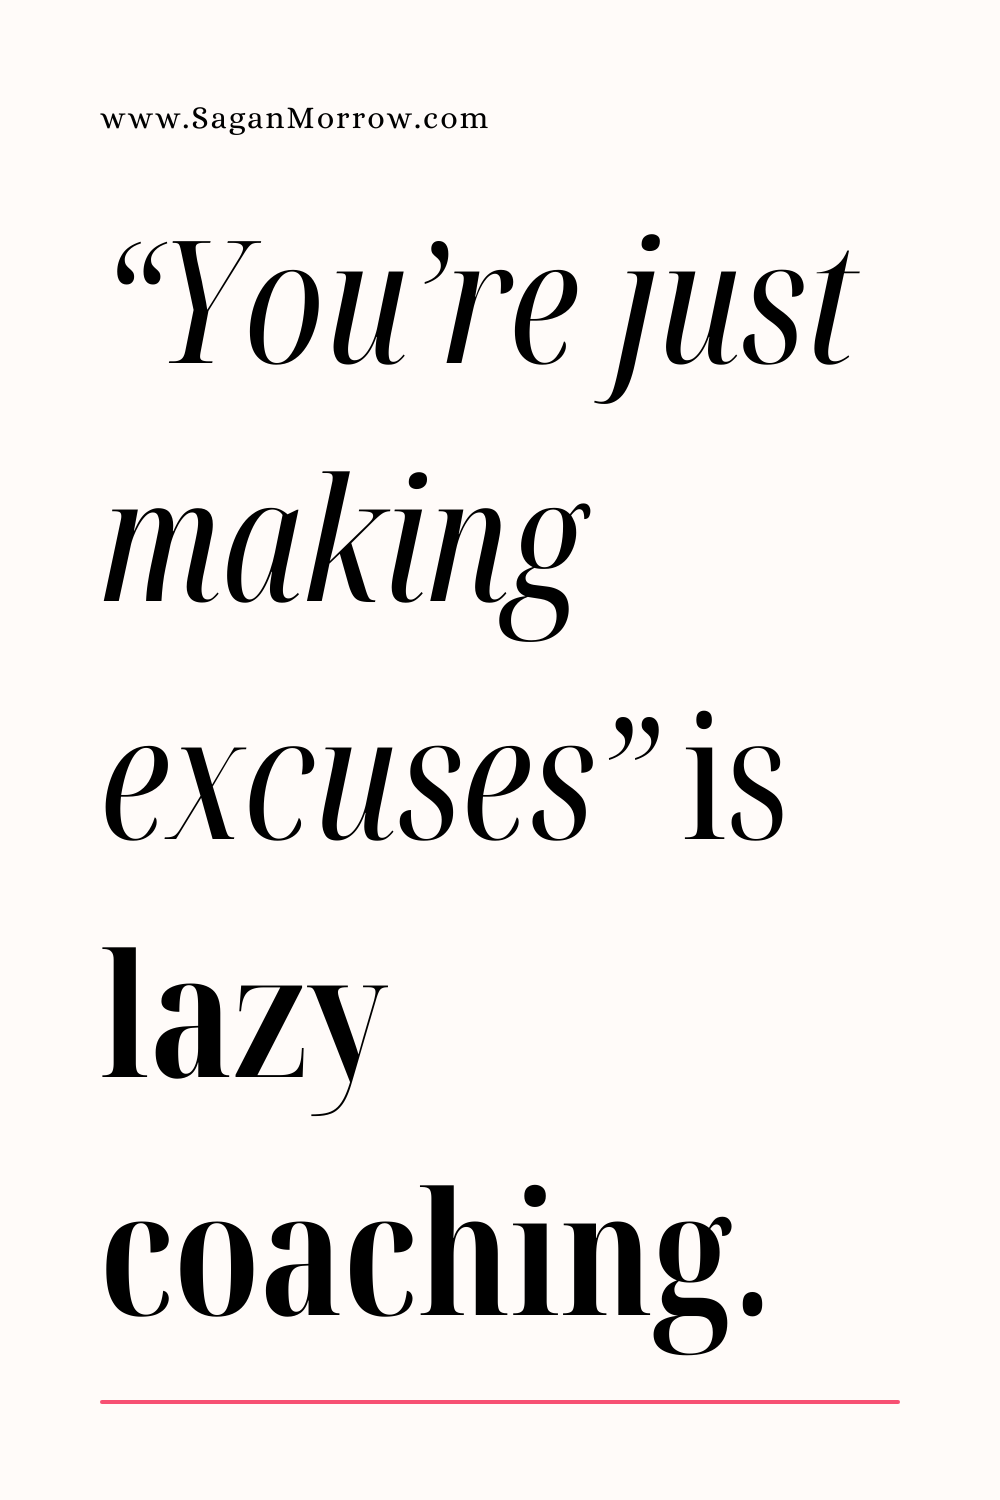 "You're just making excuses" is lazy coaching - what makes for a good coach quote